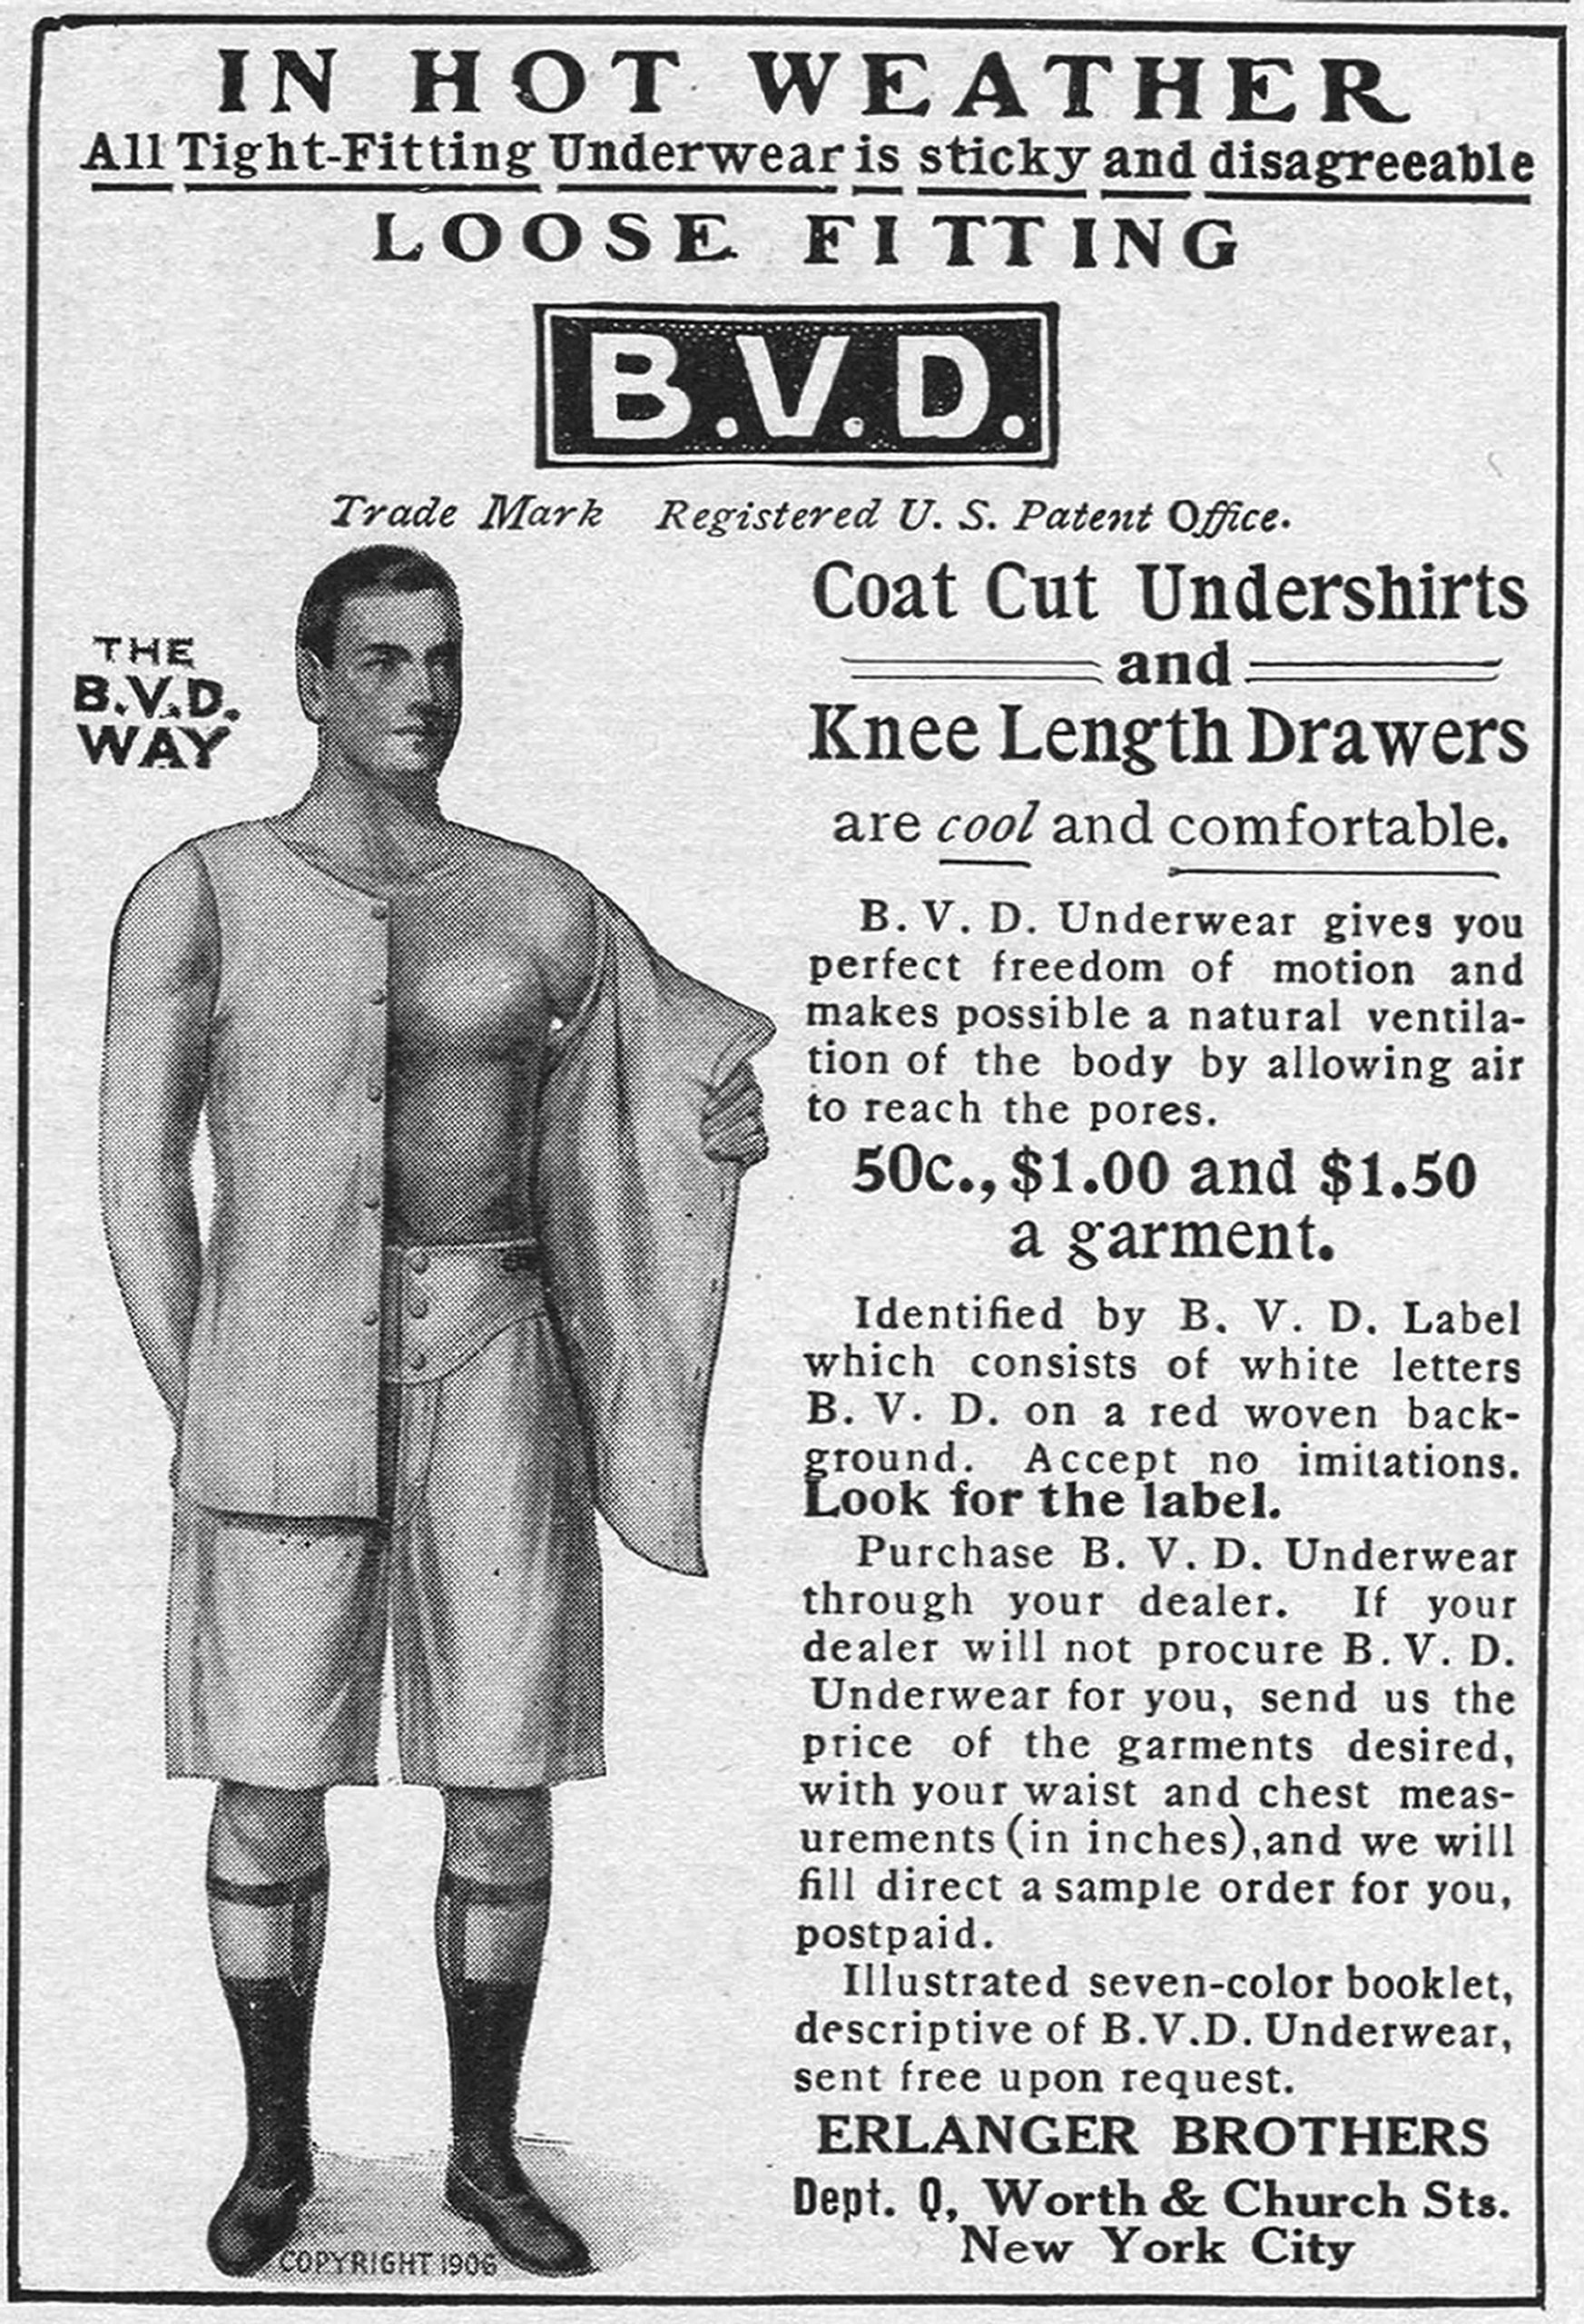 Advertisement for BVD undershirts and drawers underwear by Erlanger Brothers in New York, 1907.